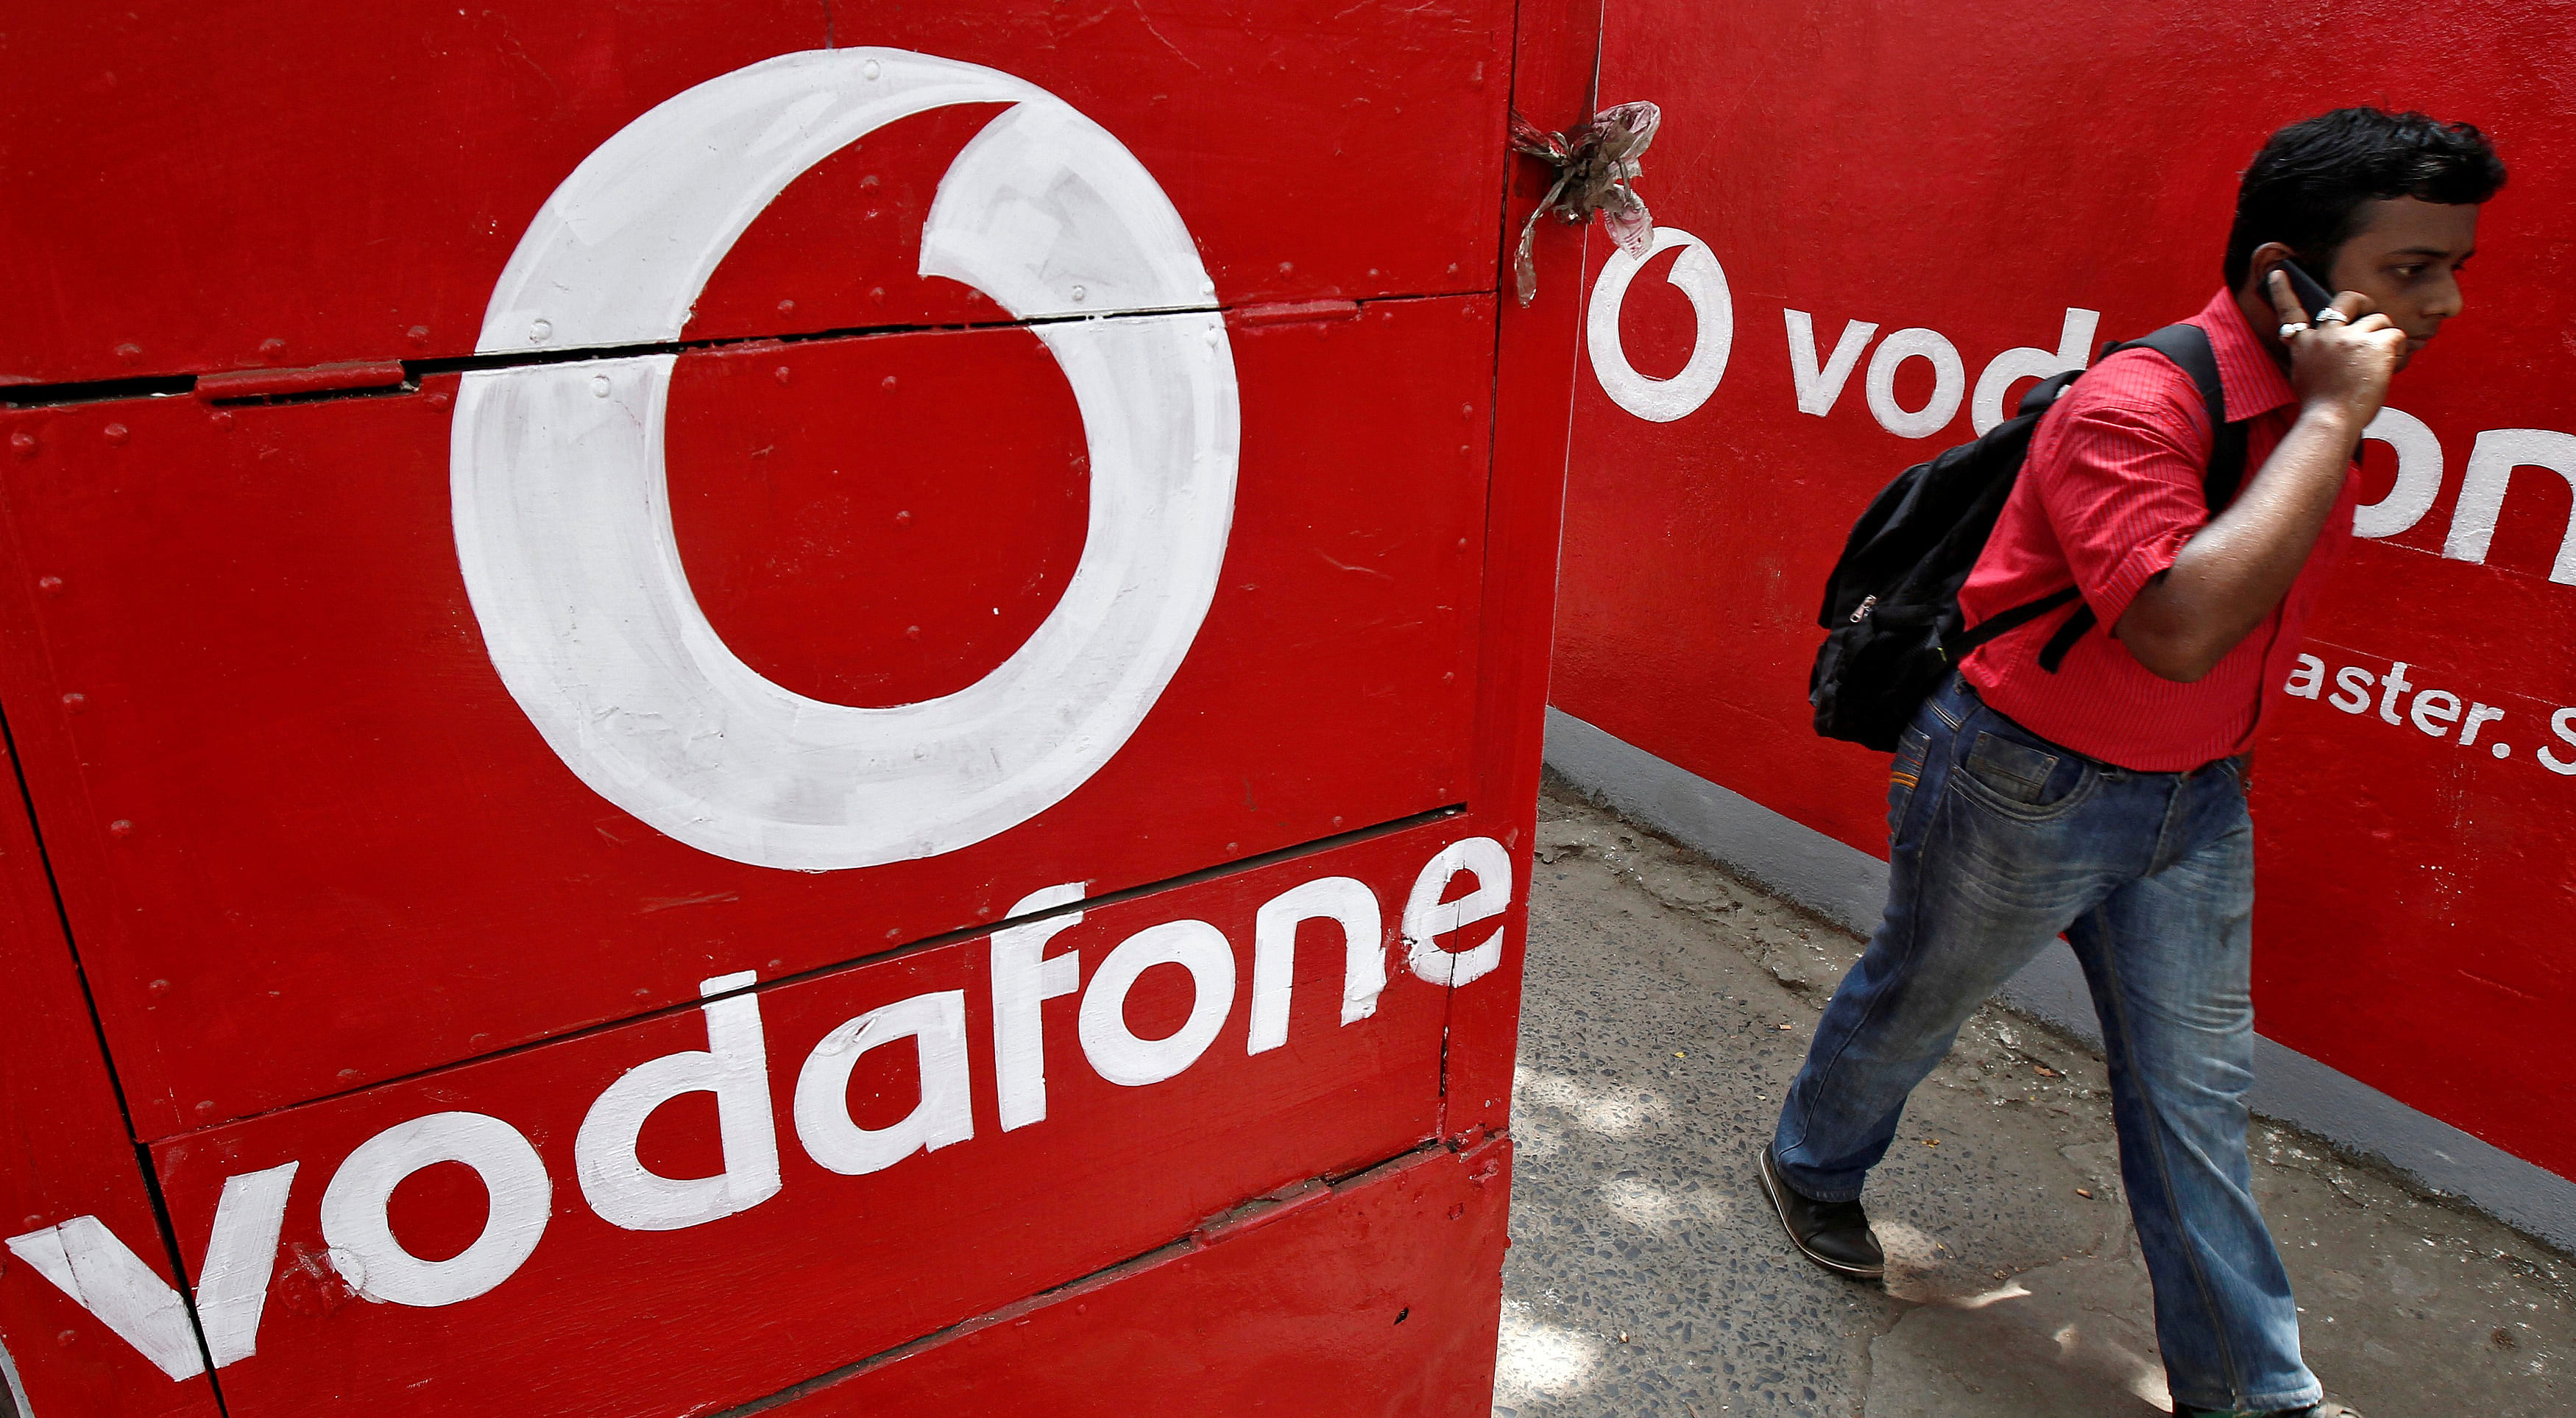 The quarrel goes back to Vodafone’s 2007 purchase of Li Ka-shing’s India wireless business. The Hong Kong tycoon sold a Cayman Islands-based investment firm to the UK operator. That firm controlled, via other offshore entities, CK Hutchison Holdings Ltd.’s  67% stake in Hutchison Essar Ltd., the Indian unit. The taxman wanted a share of CK’s vast capital gains and asked Vodafone to settle the bill from the amount it had withheld from Li’s check. But Vodafone’s lawyers had advised that no tax was applicable. The dispute went to India’s Supreme Court, which held that the government’s tax jurisdiction didn’t extend to the Cayman Islands. Credit: Reuters